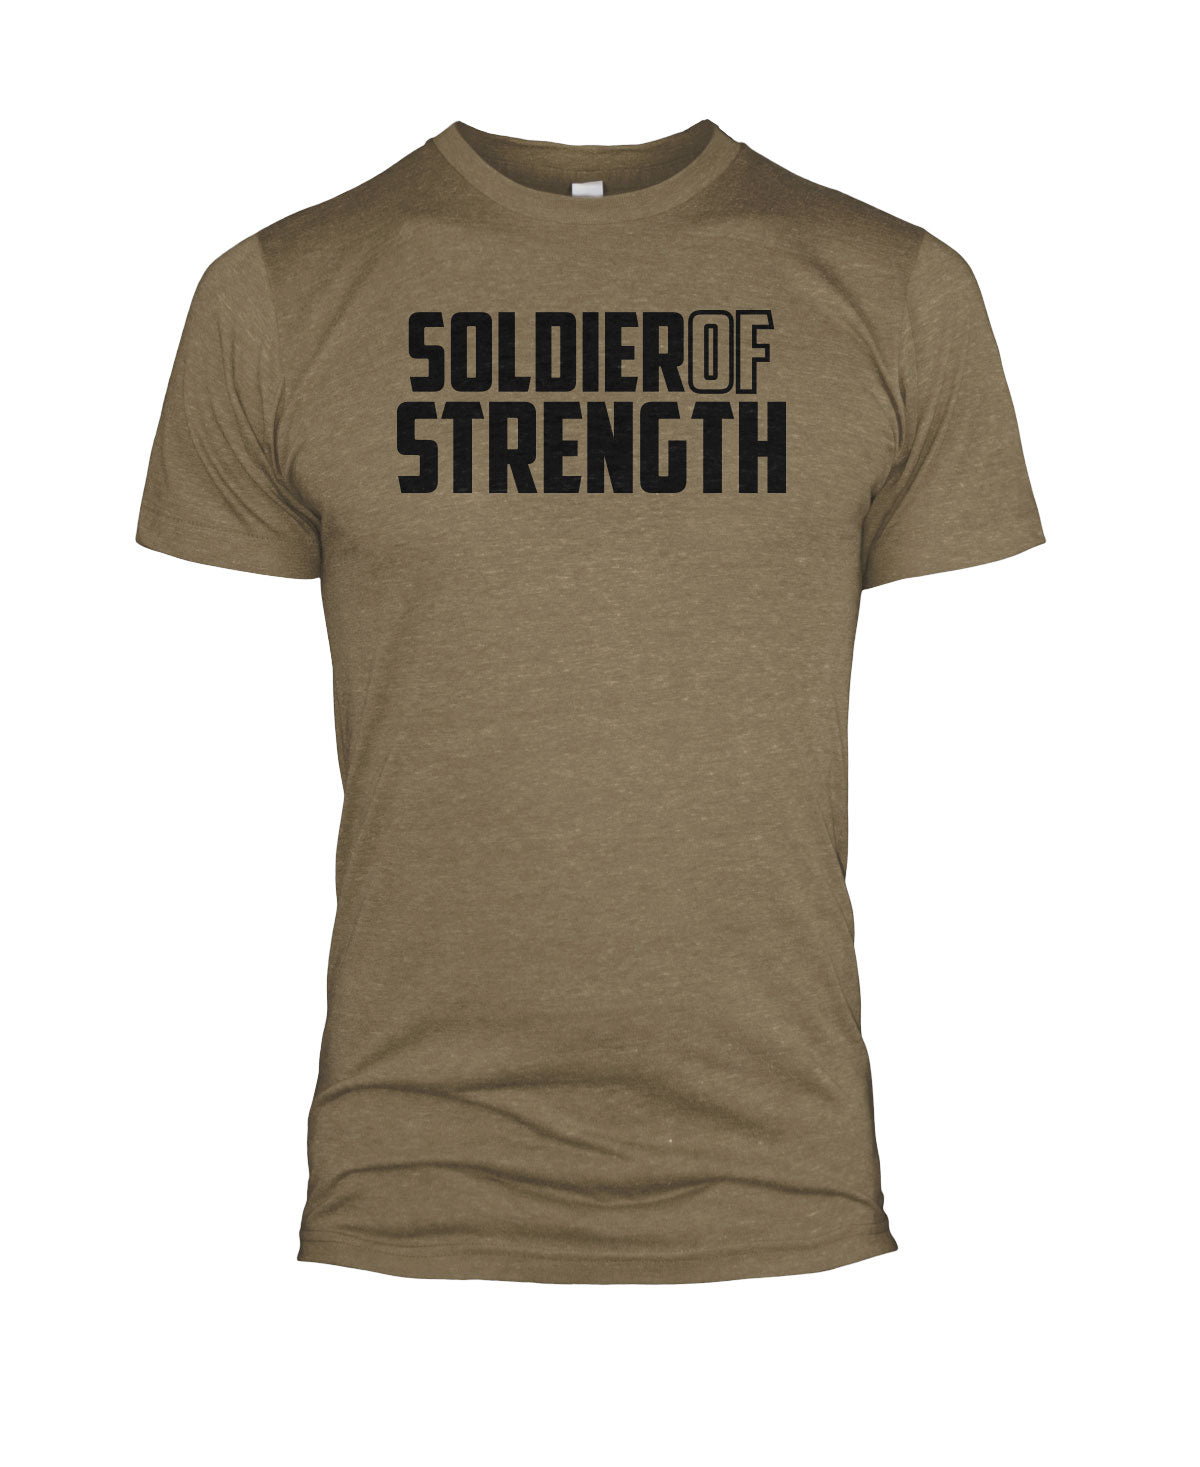 Soldier of Strength Tee